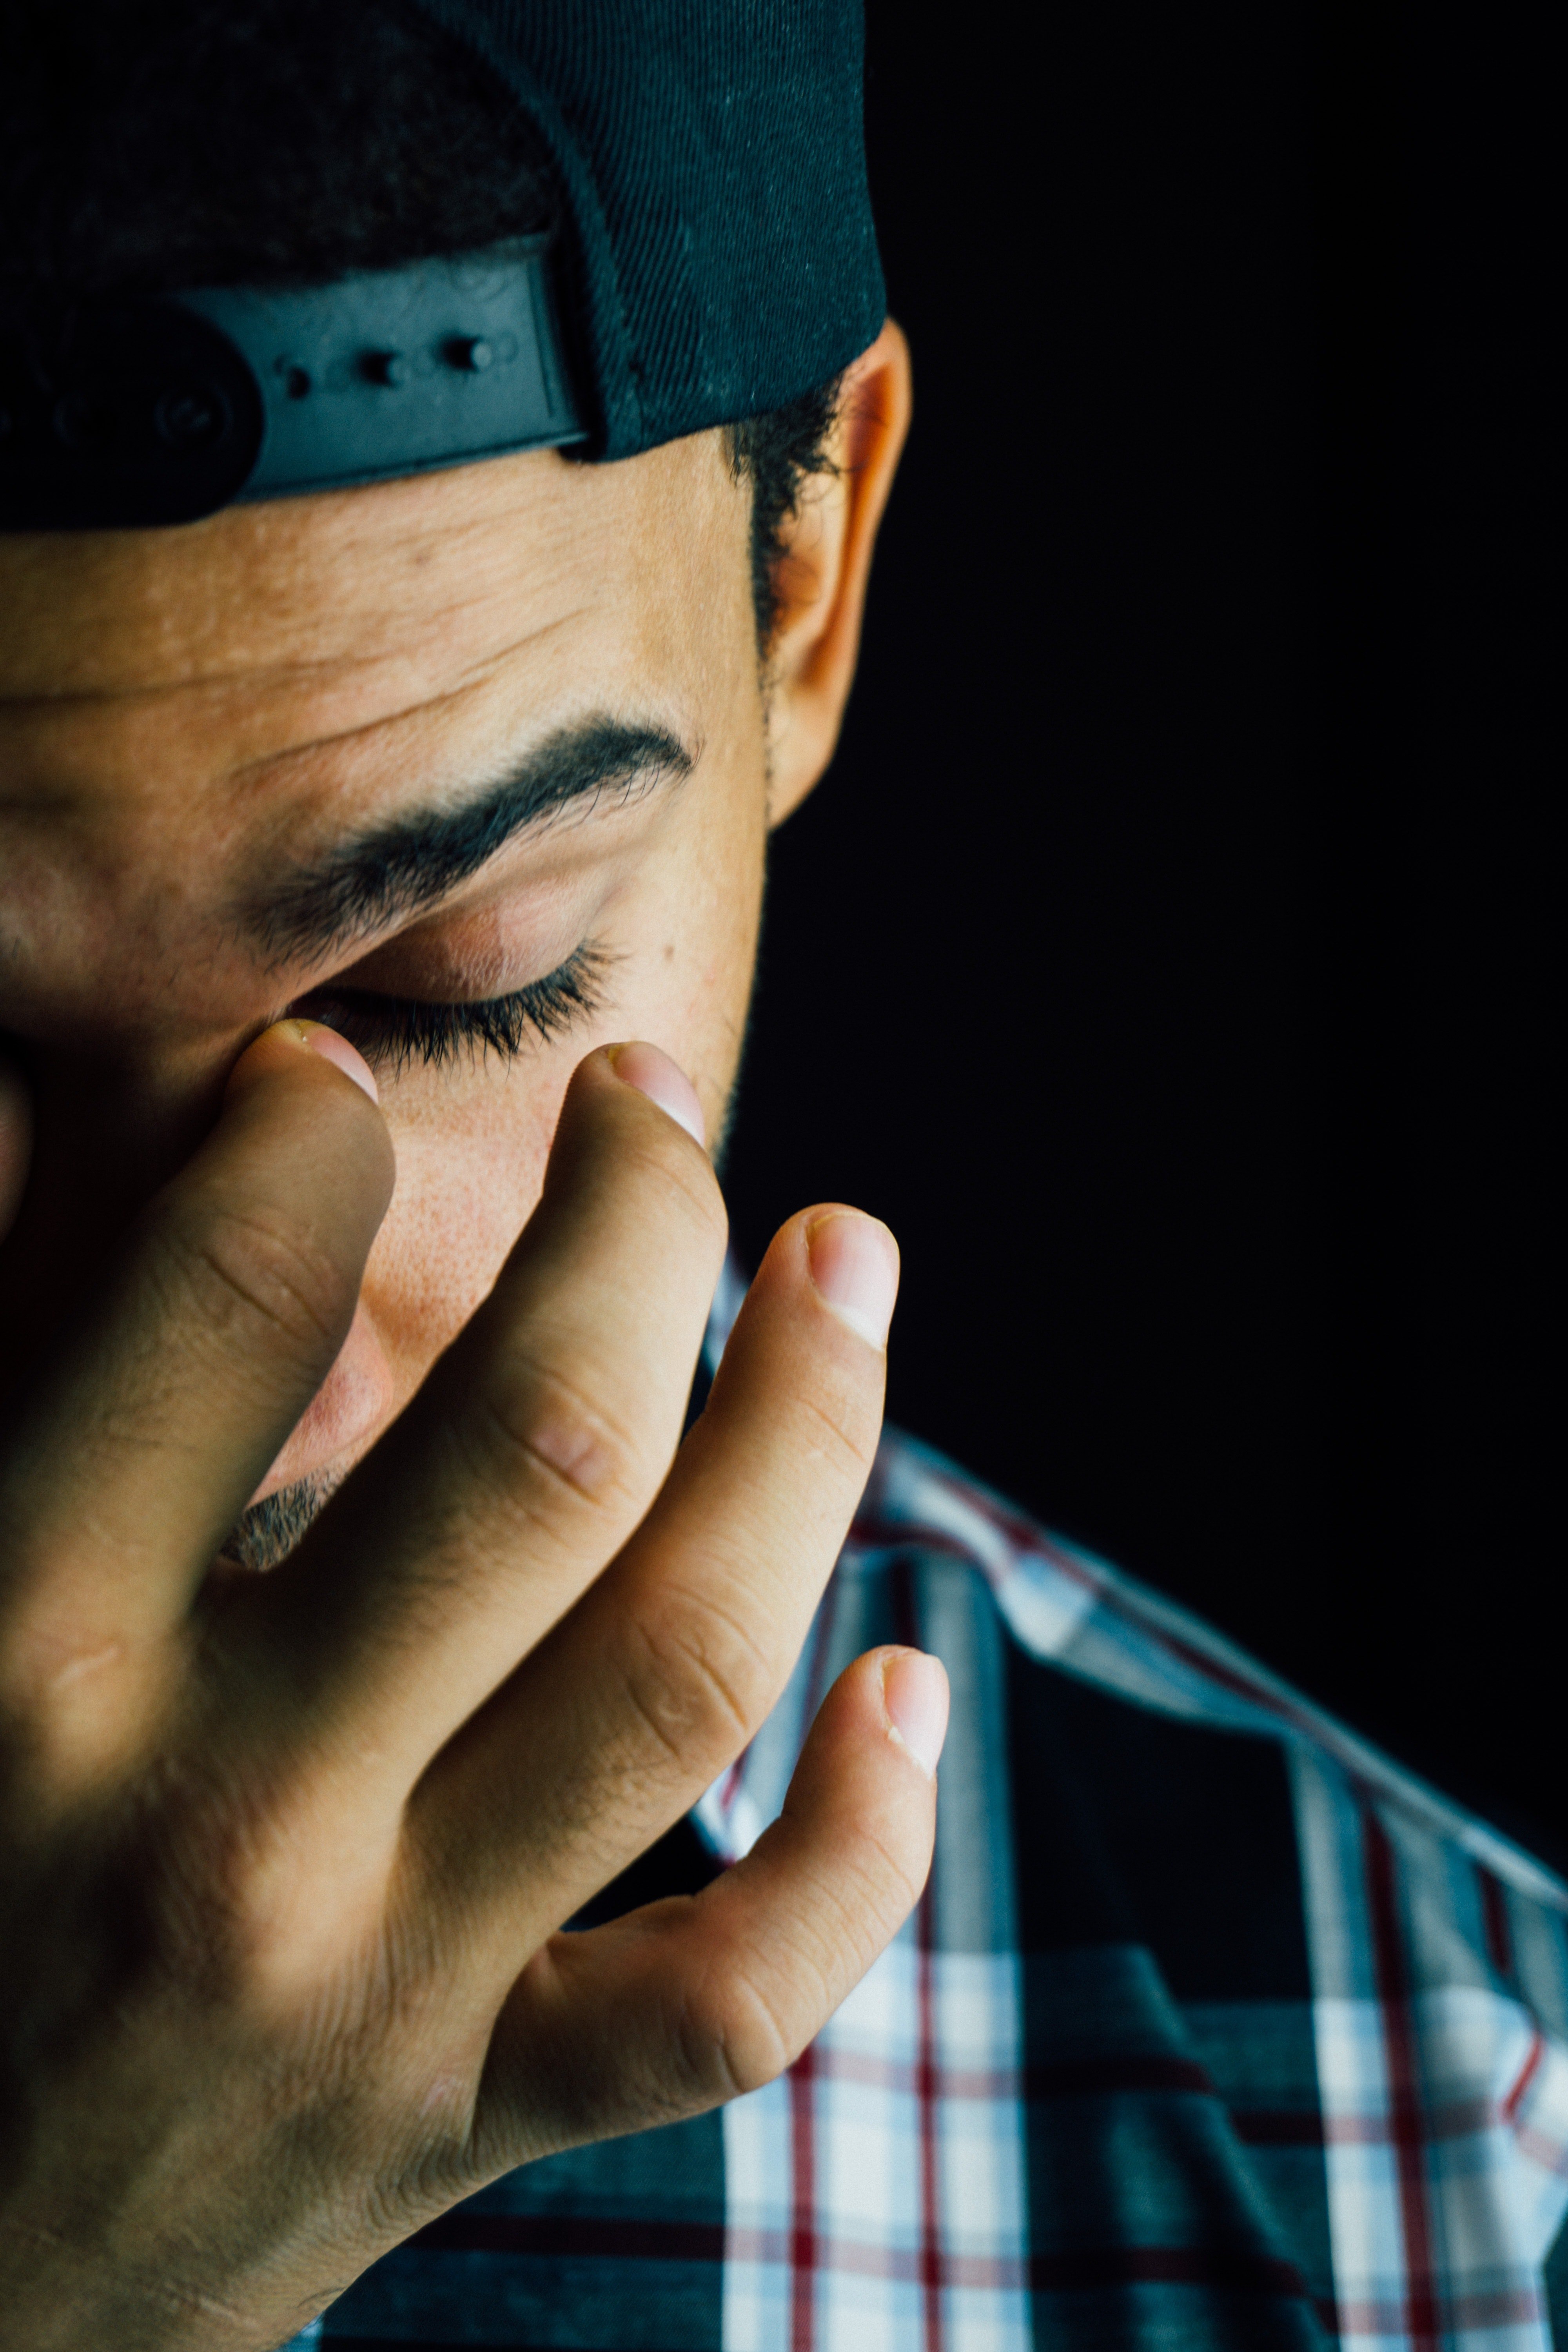 A frustrated man covering his face. | Source: Pexels